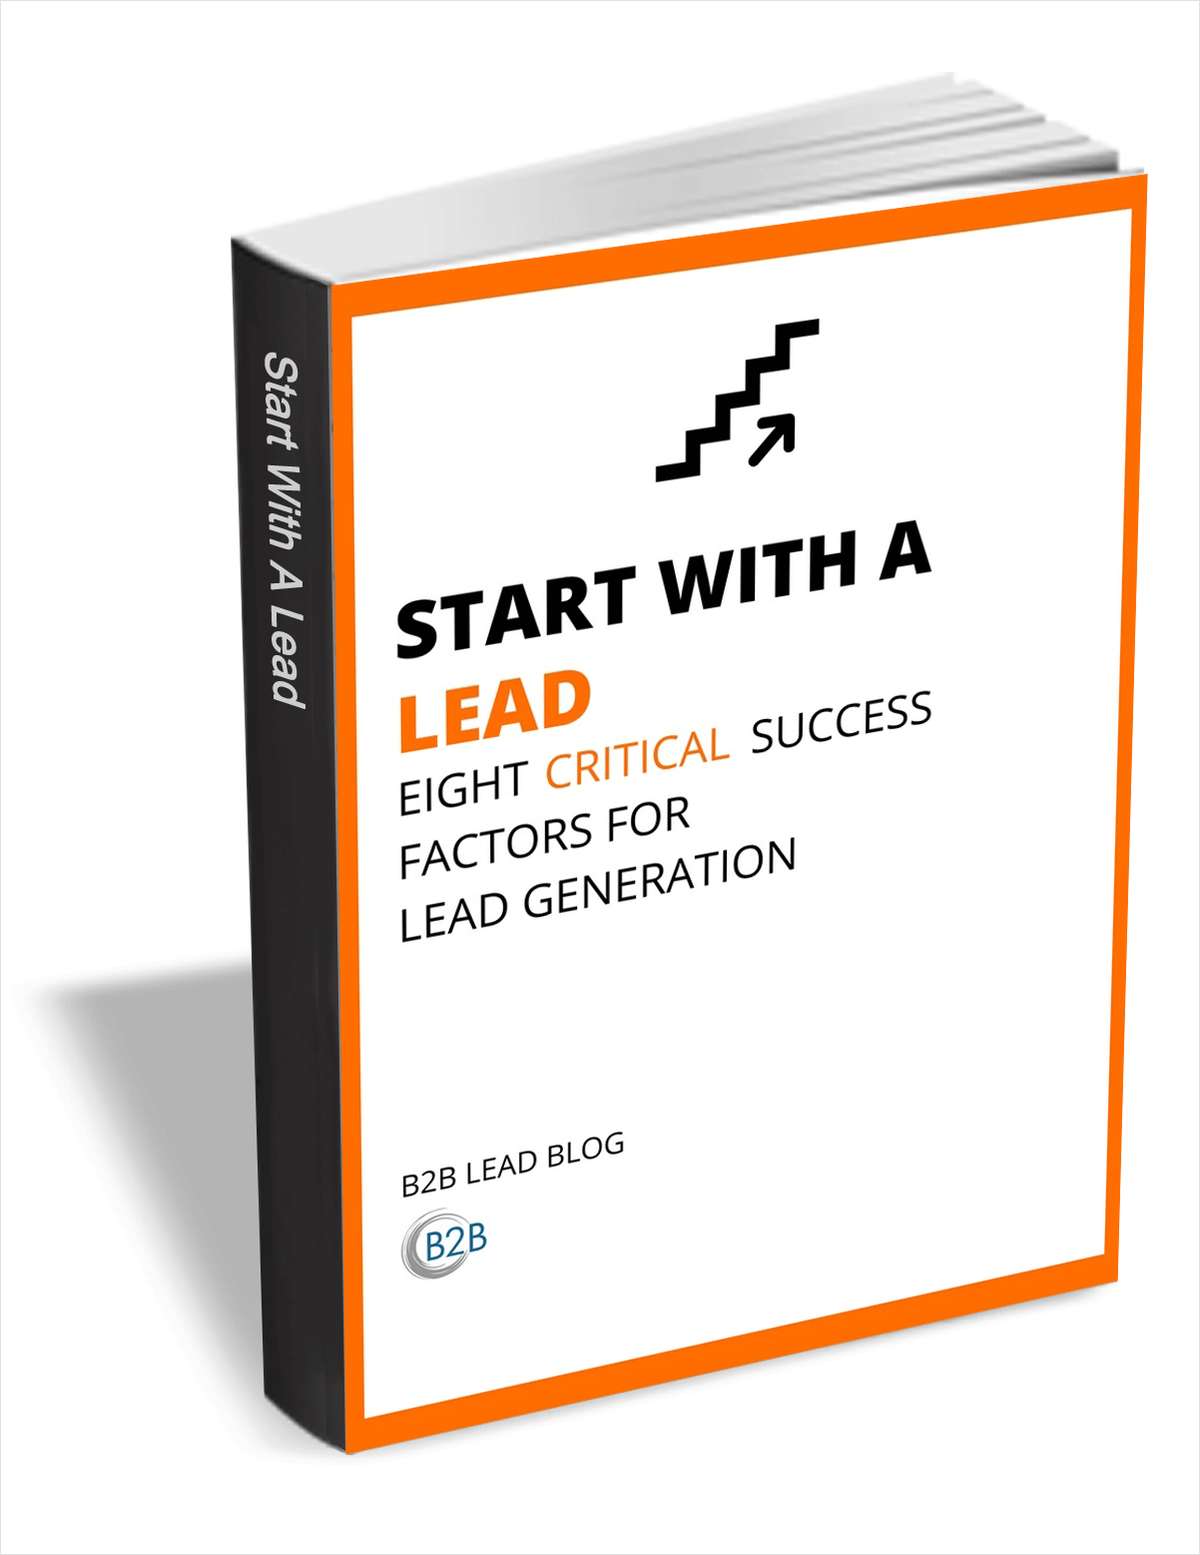 Start with a Lead - Eight Critical Success Factors for Lead Generation